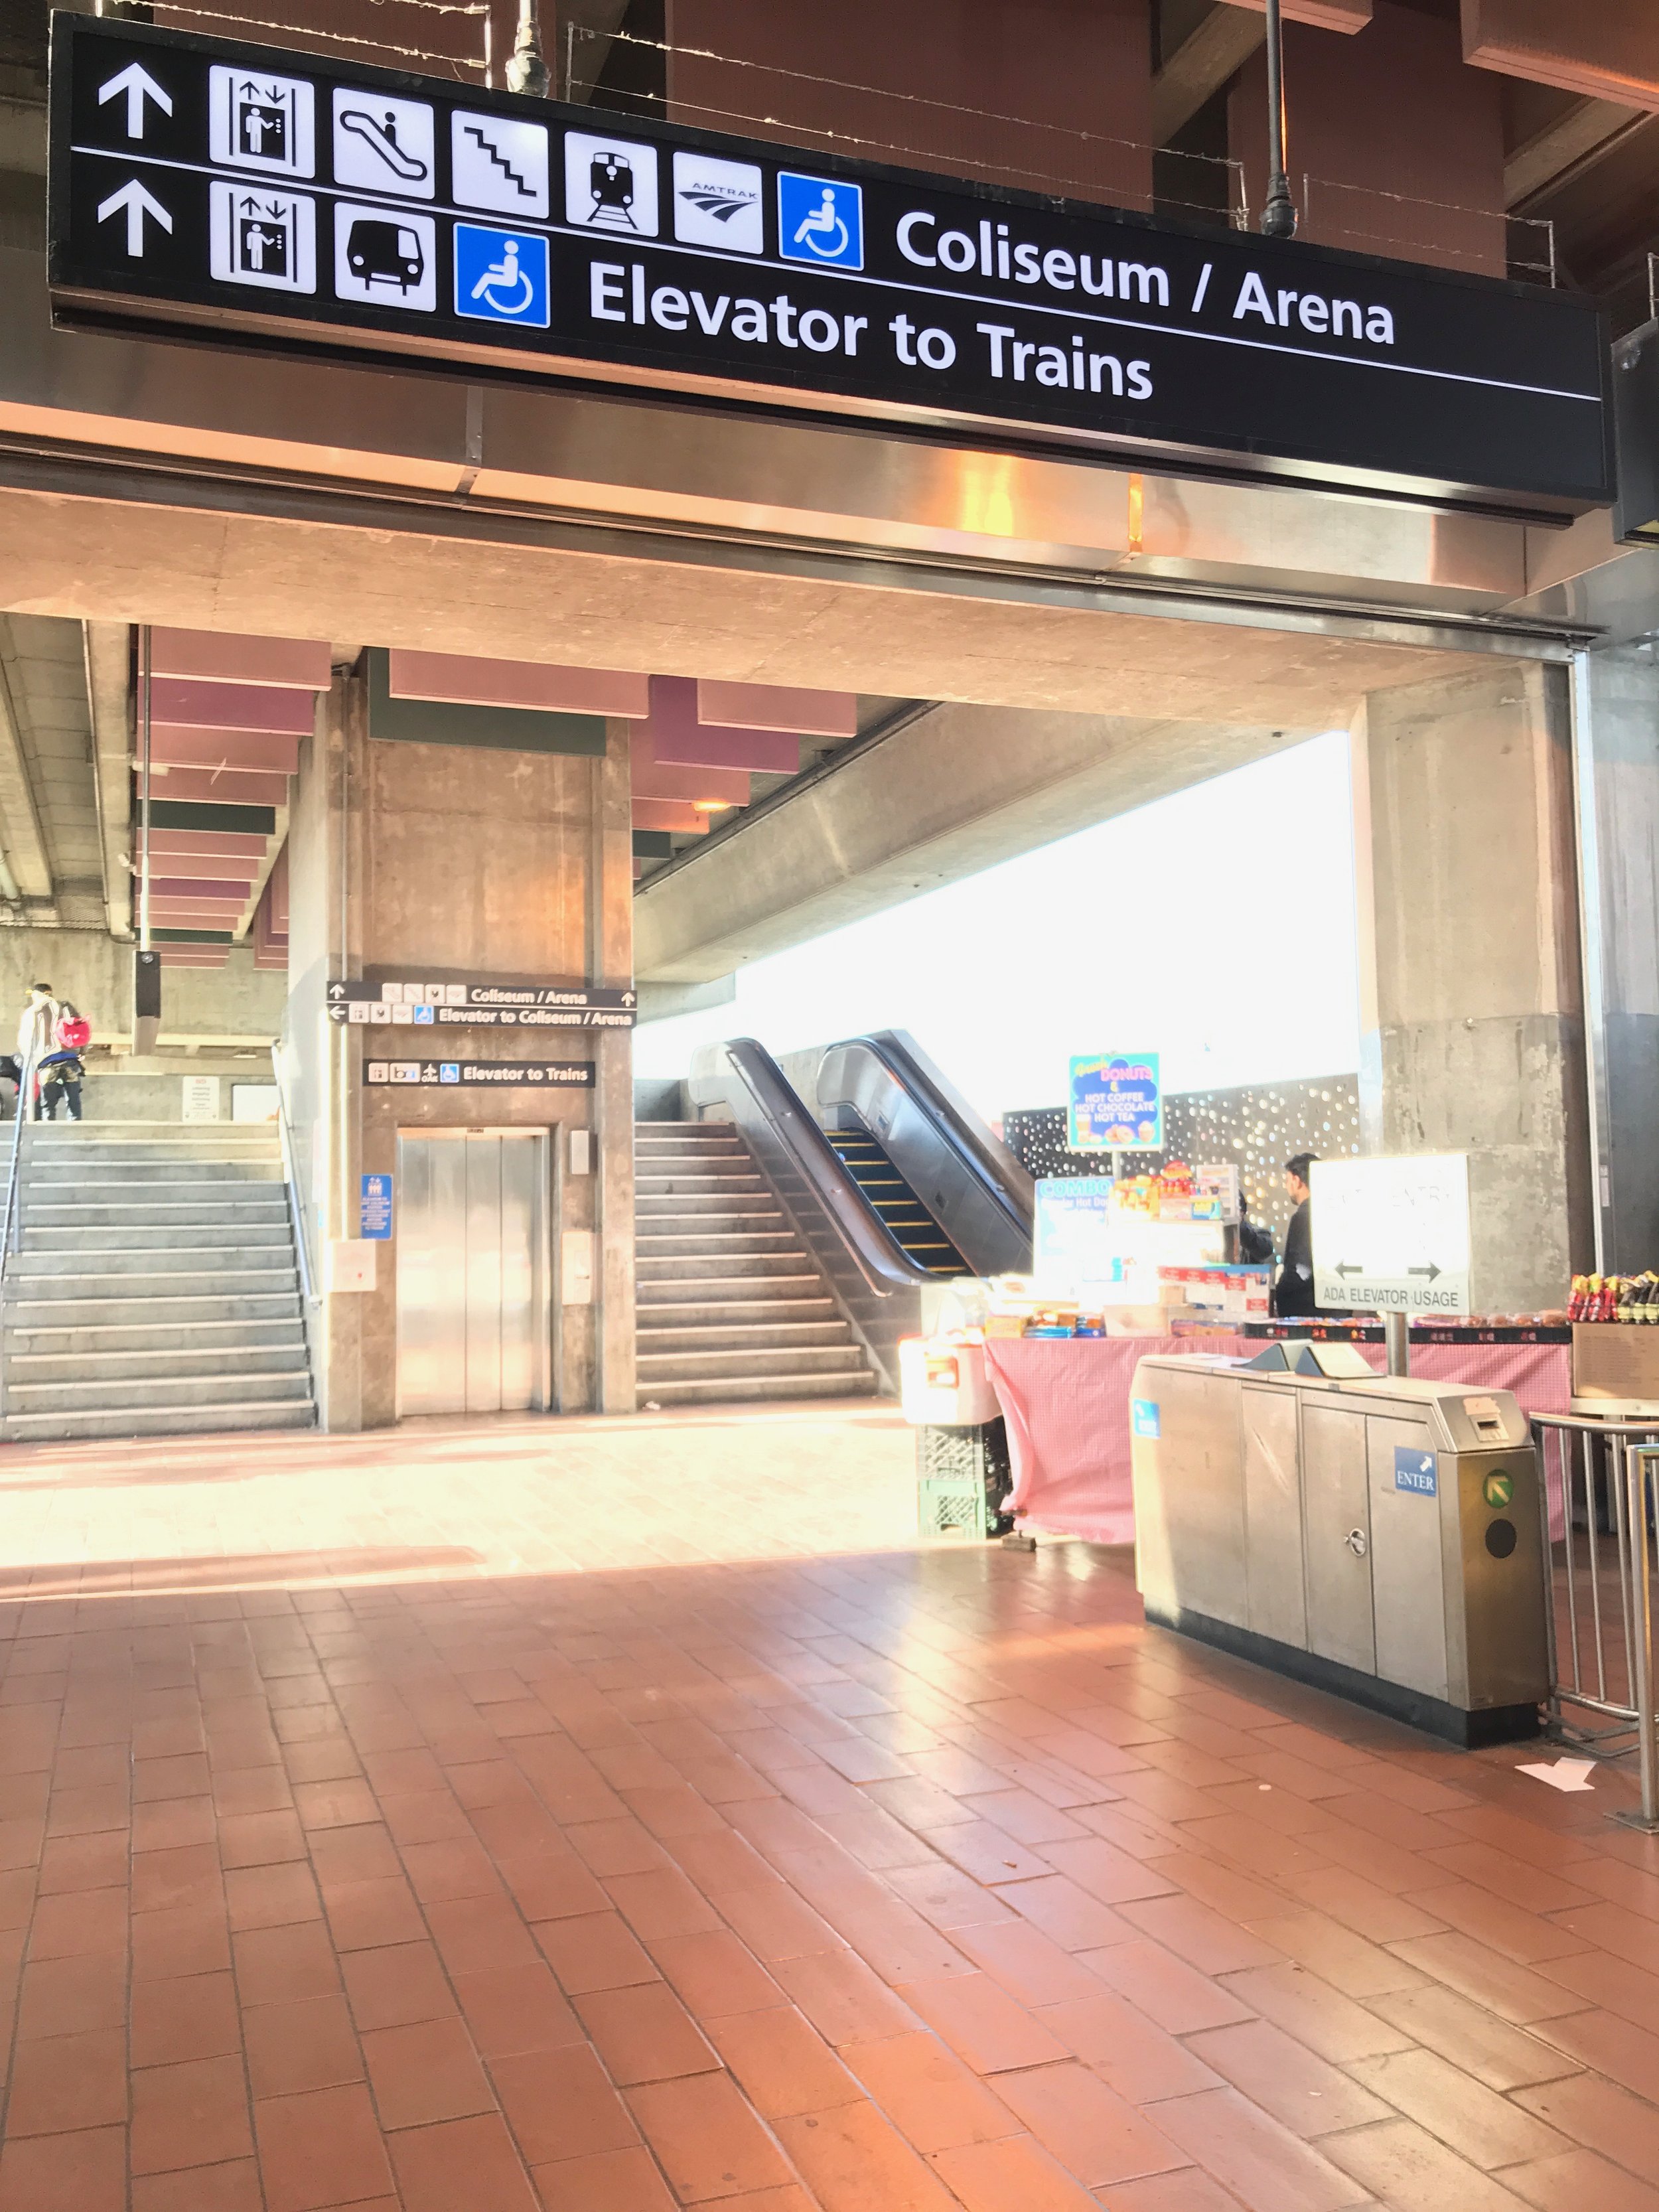 The Coliseum BART station is a 5min drive